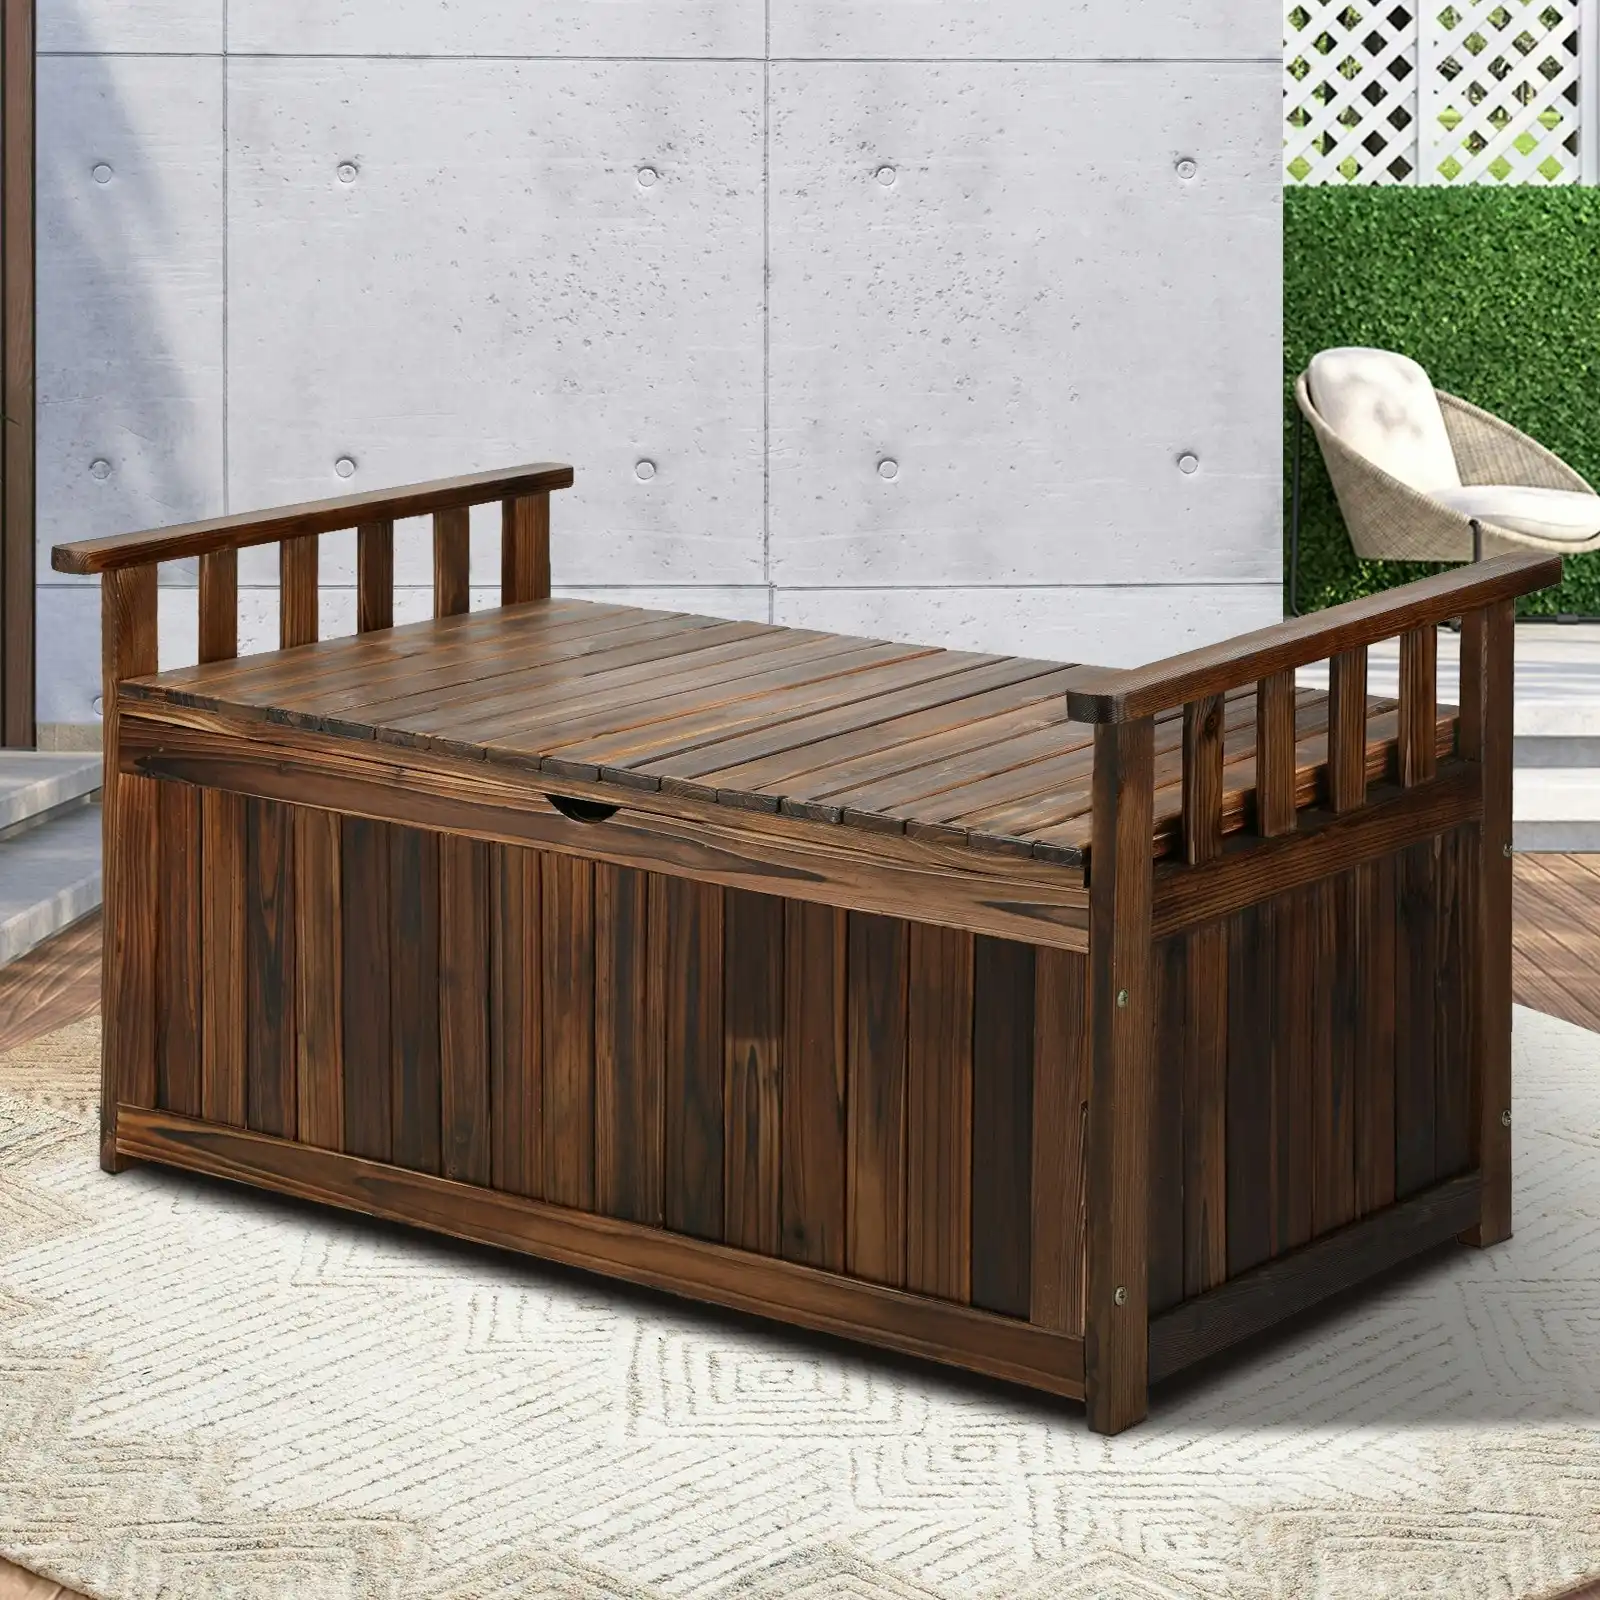 Livsip Outdoor Storage Box Wooden Garden Bench Chest Tool Container L Charcoal